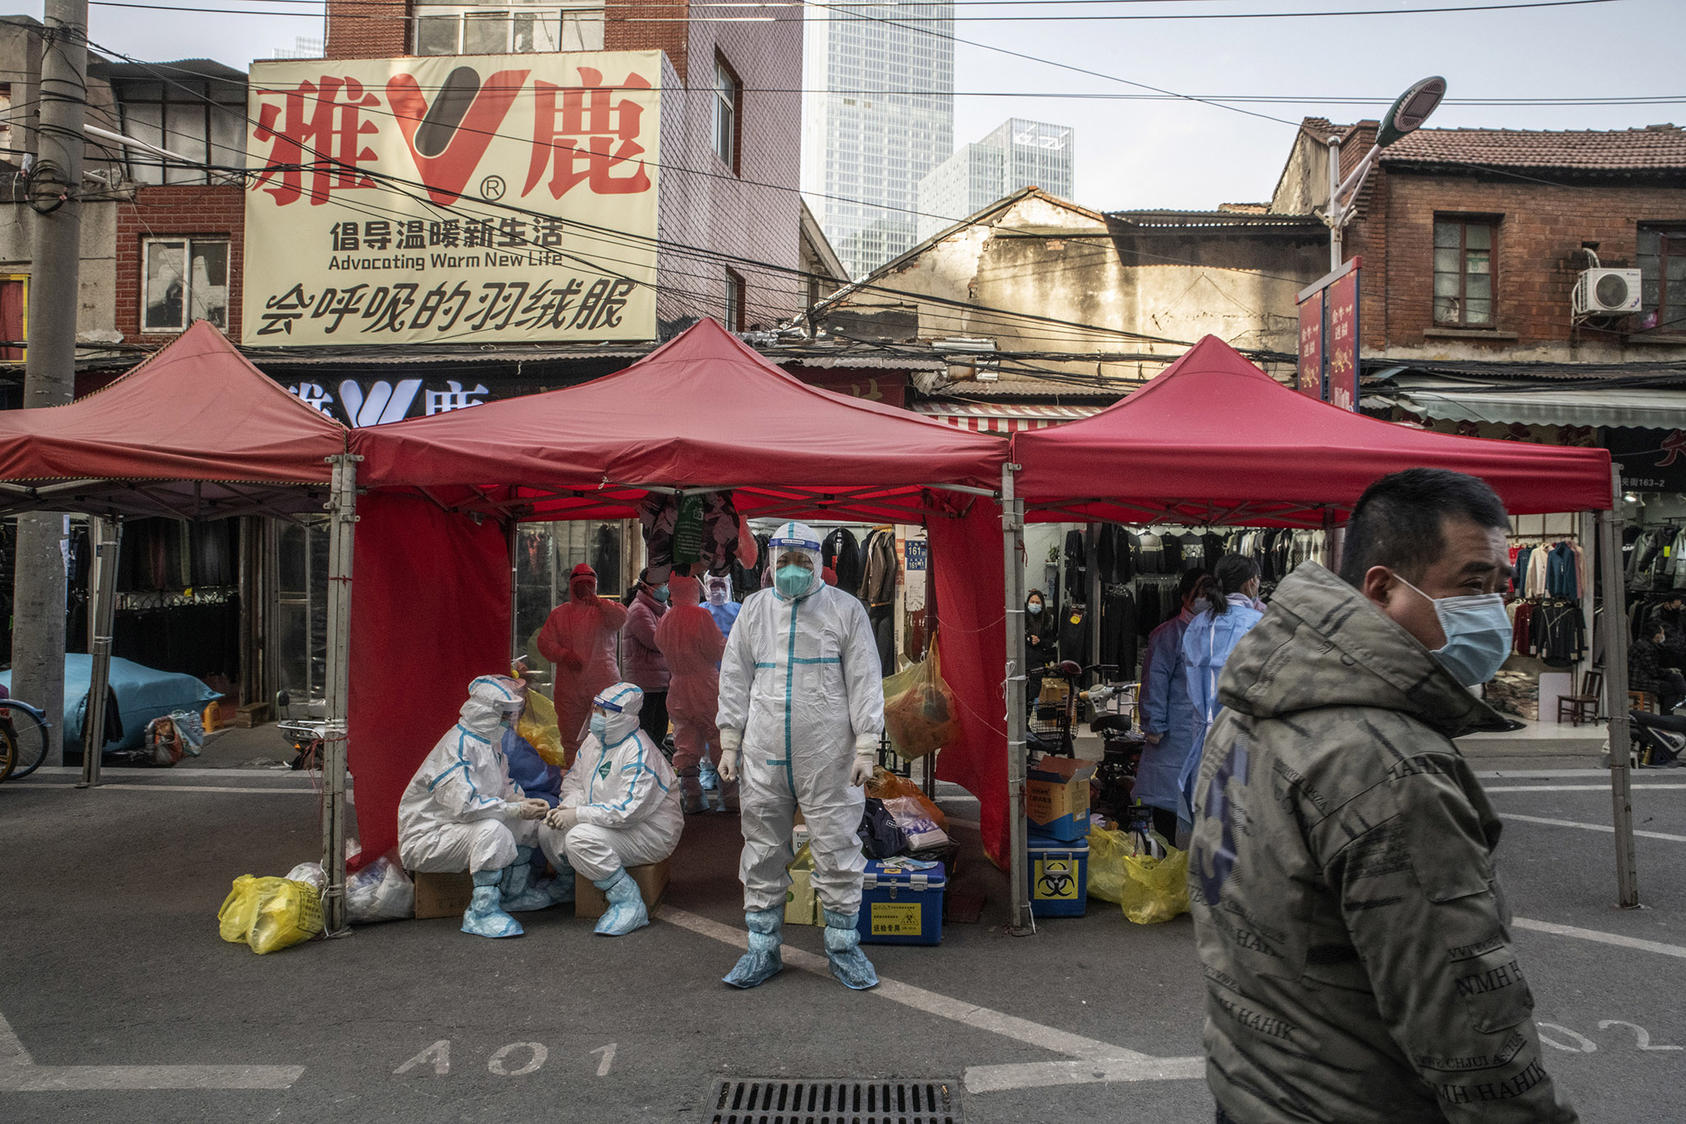 Health workers during a COVID alert in Wuhan, China on Jan. 11, 2021. (Gilles Sabrie/The NewYork Times)